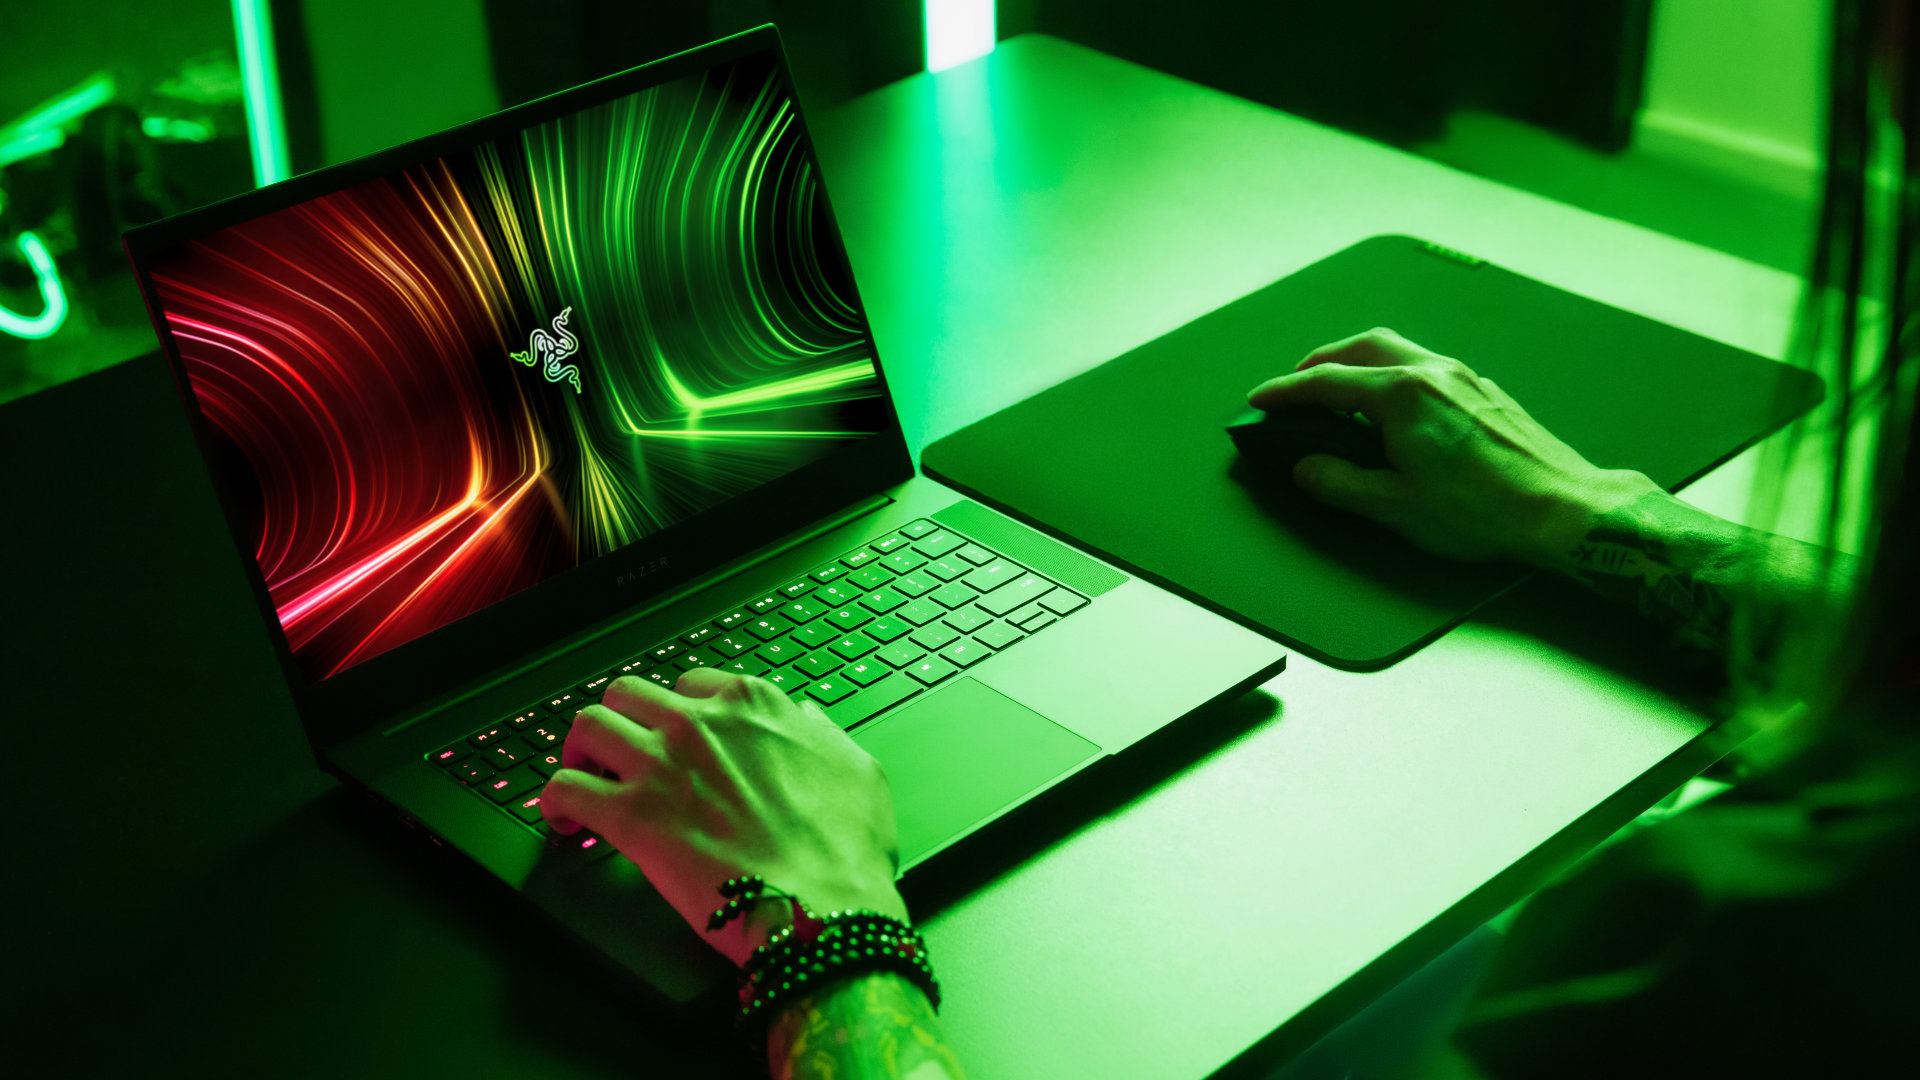 The new Razer Blade 14 gaming laptop packs an AMD CPU instead of Intel